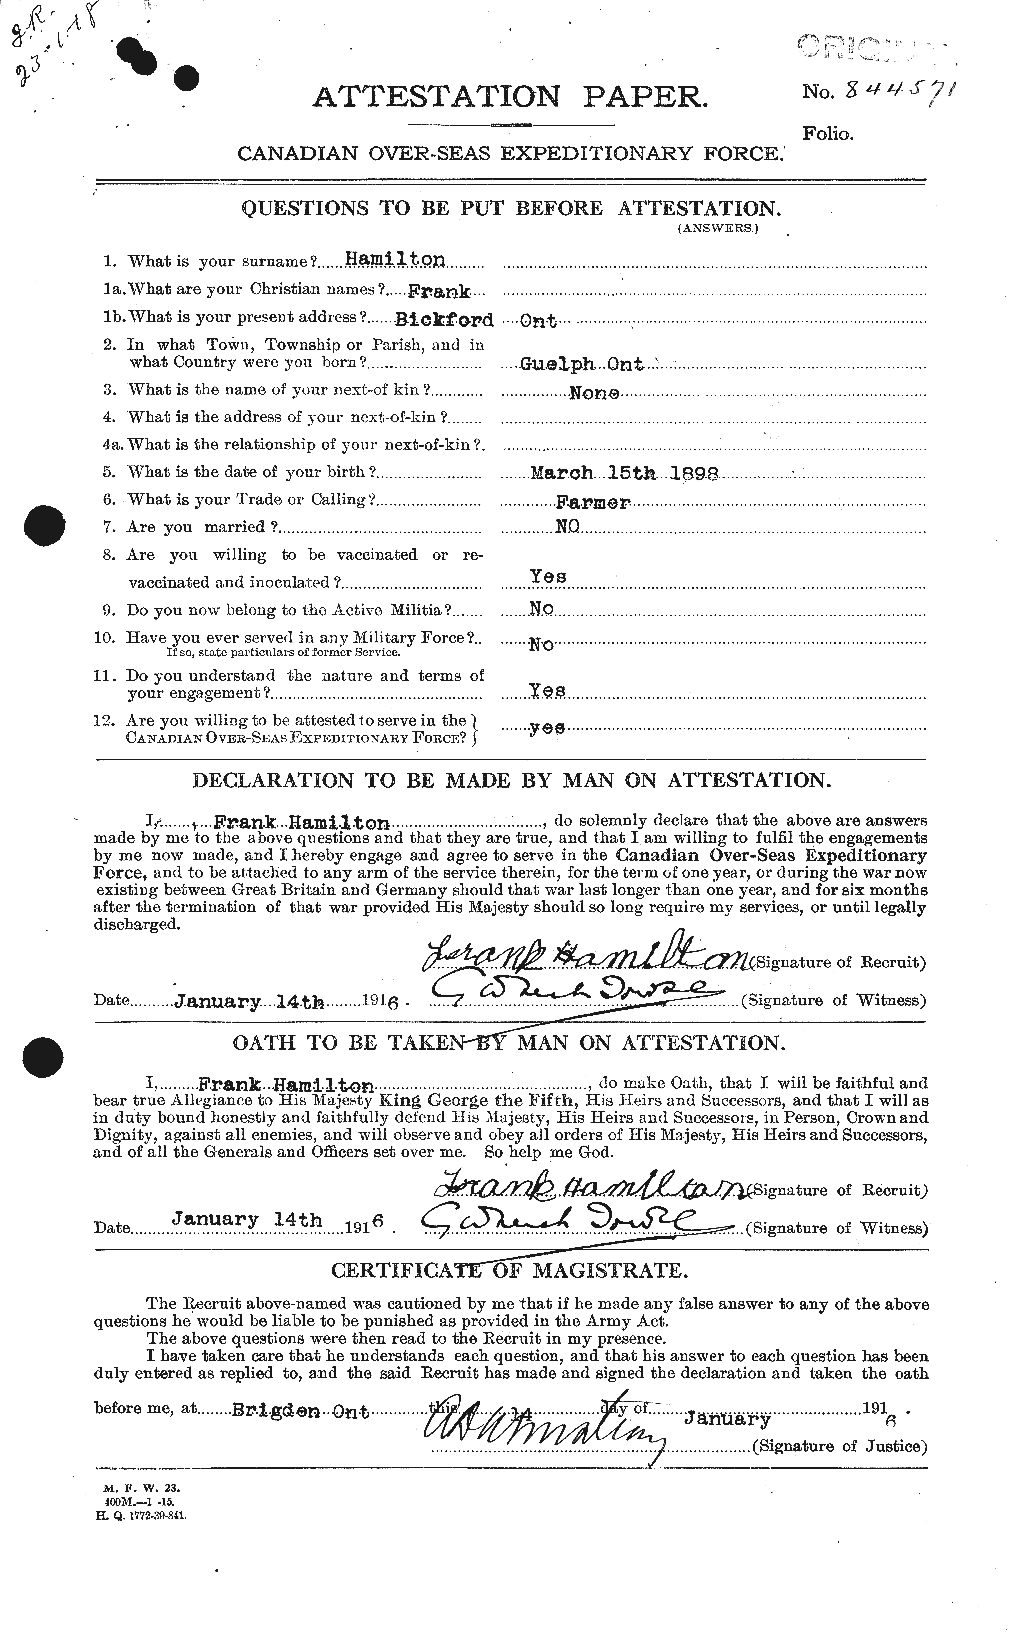 Personnel Records of the First World War - CEF 372388a